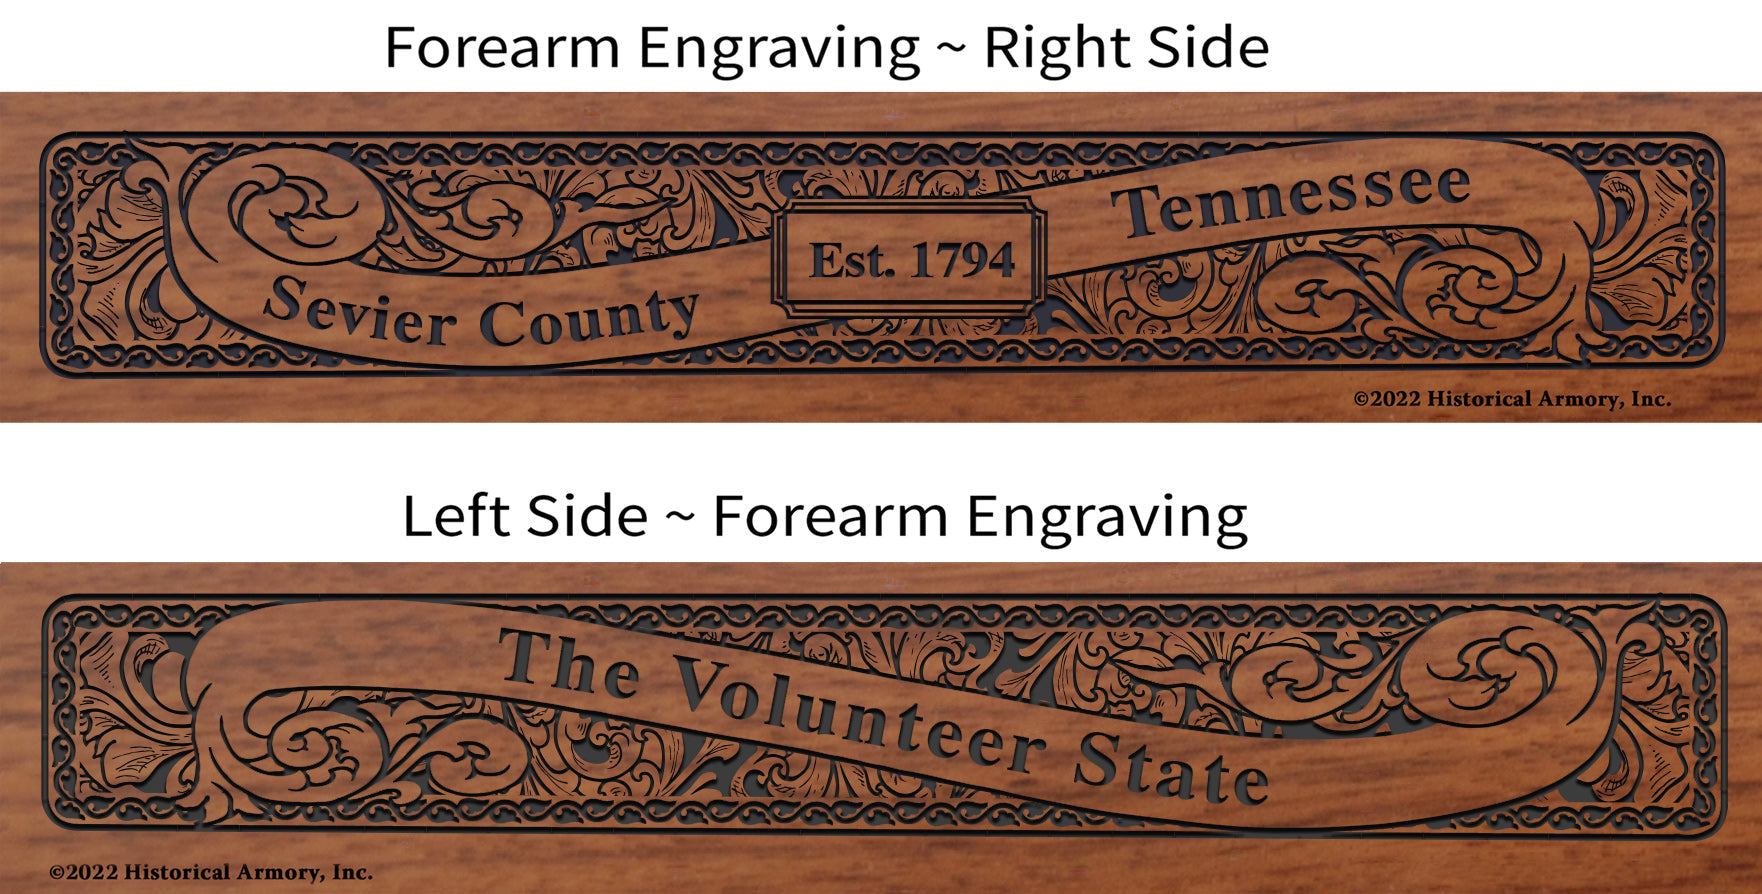 Sevier County Tennessee Engraved Rifle Forearm